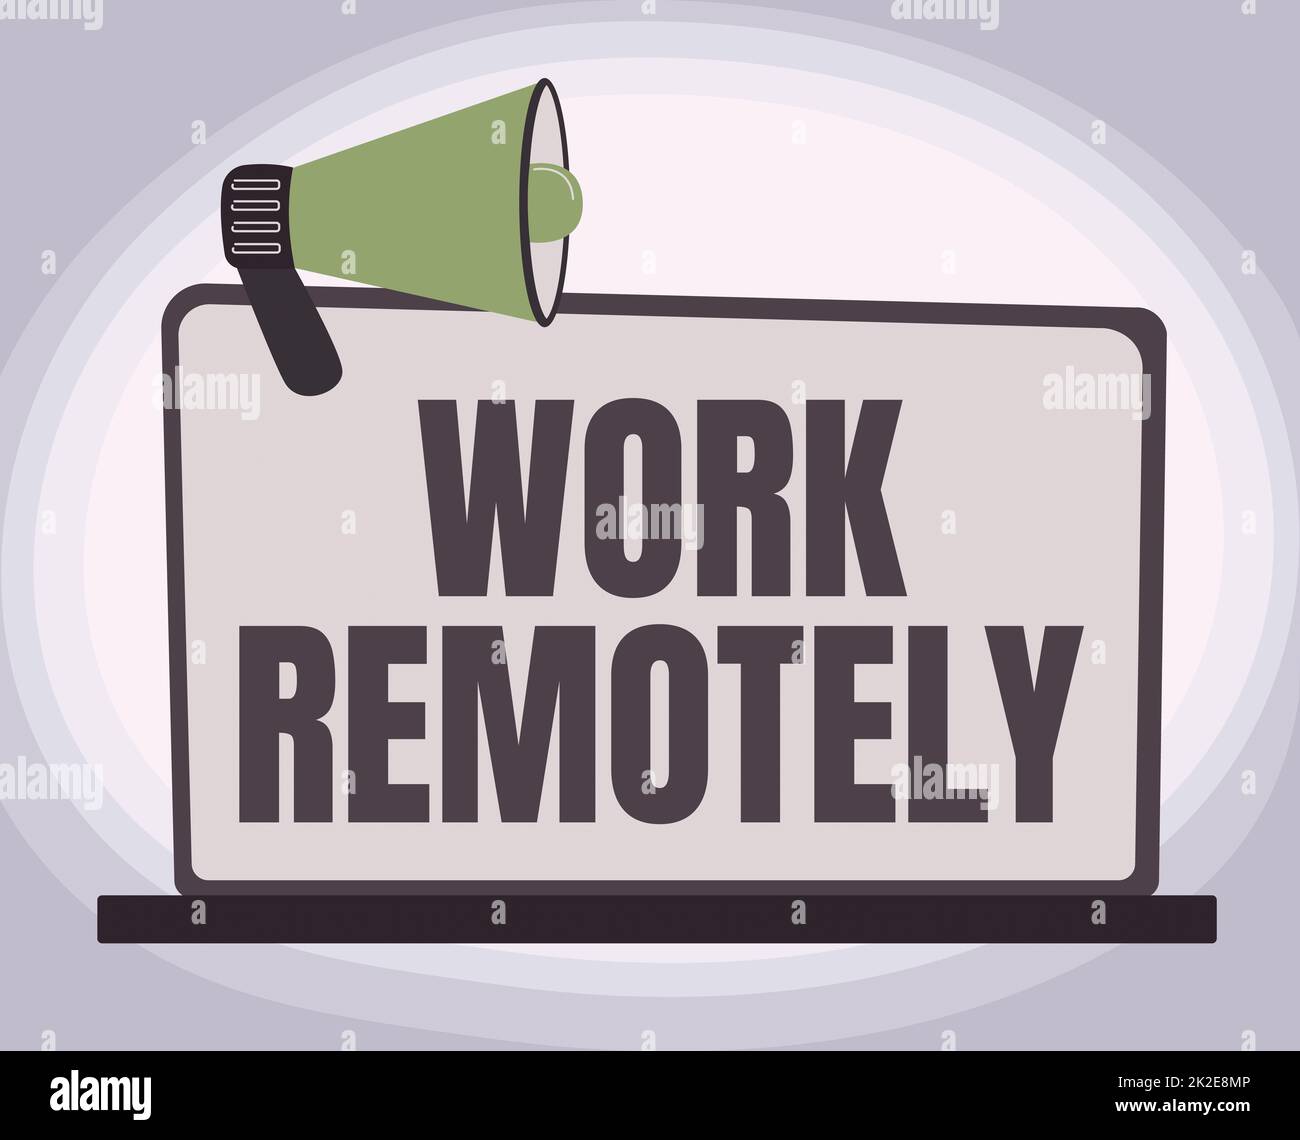 Sign displaying Work Remotely. Internet Concept Work Remotely Illustration Of Megaphone On Blank Monitor Making Announcements. Stock Photo